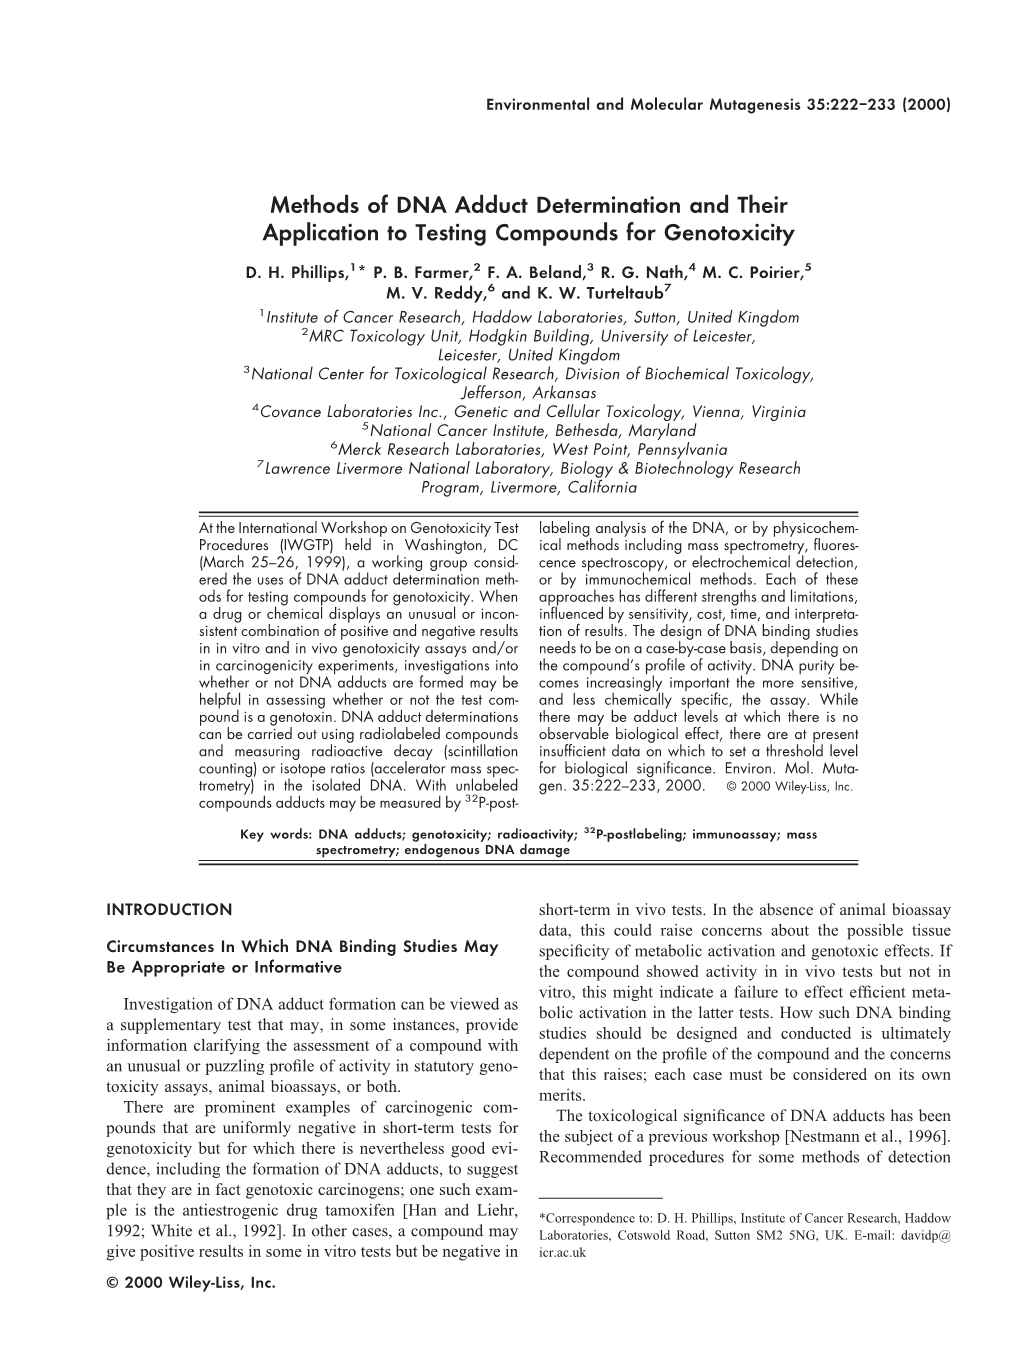 Methods of DNA Adduct Determination and Their Application to Testing Compounds for Genotoxicity